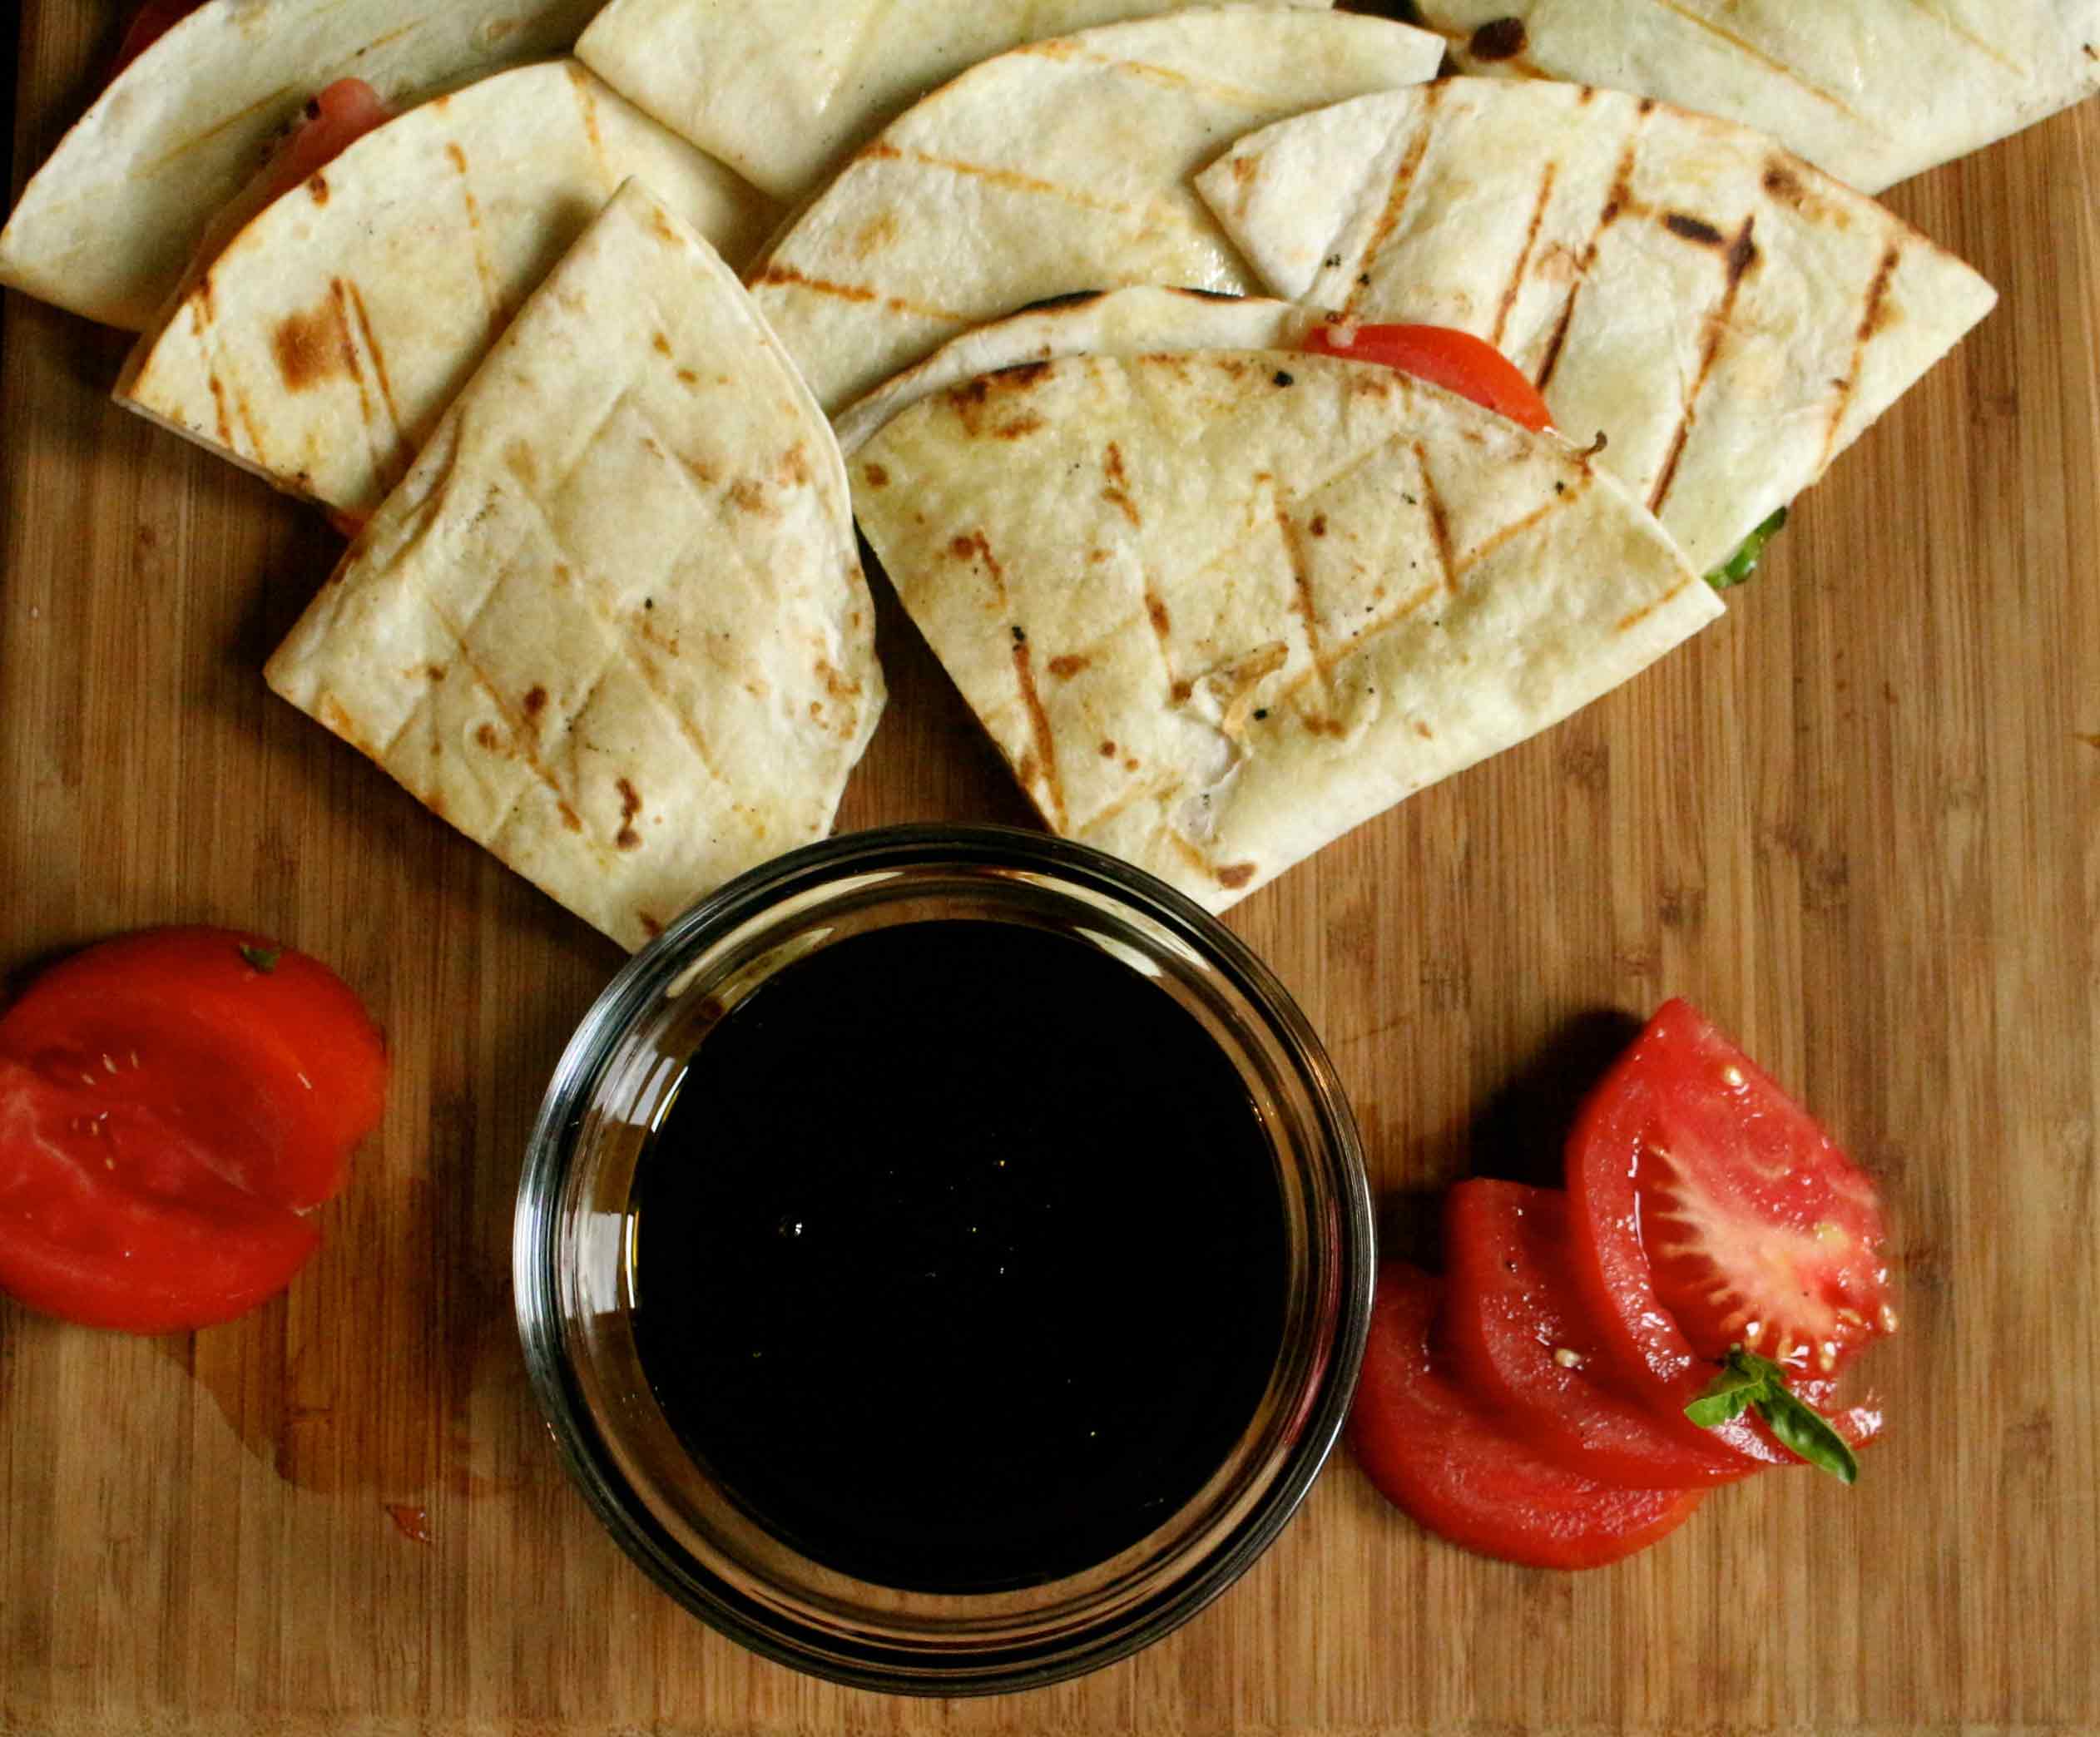 Tomato and cheese quesadilla on a brown board.